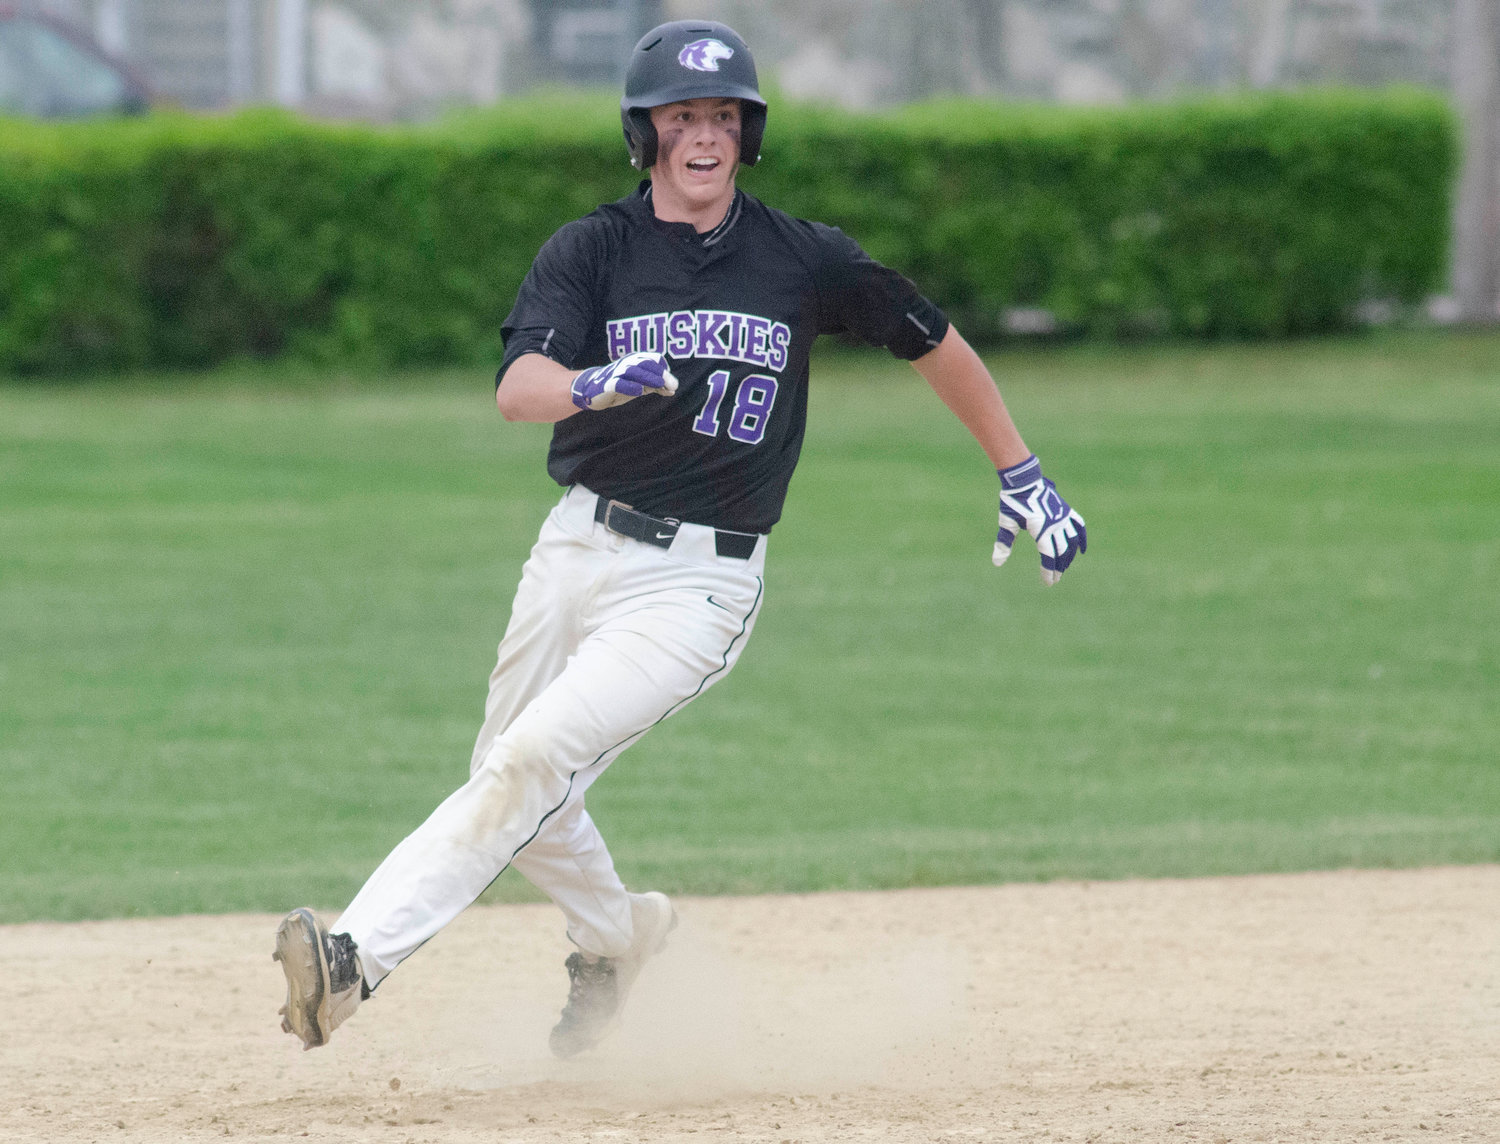 First baseman Matt Gale rounds second base after smashing a towering hit to right field for a triple to start off the bottom of the seventh inning with the Huskies down 9-8. Gale looked to head coach Mike Mazzarella as he rounded second base and slid into third base safely.